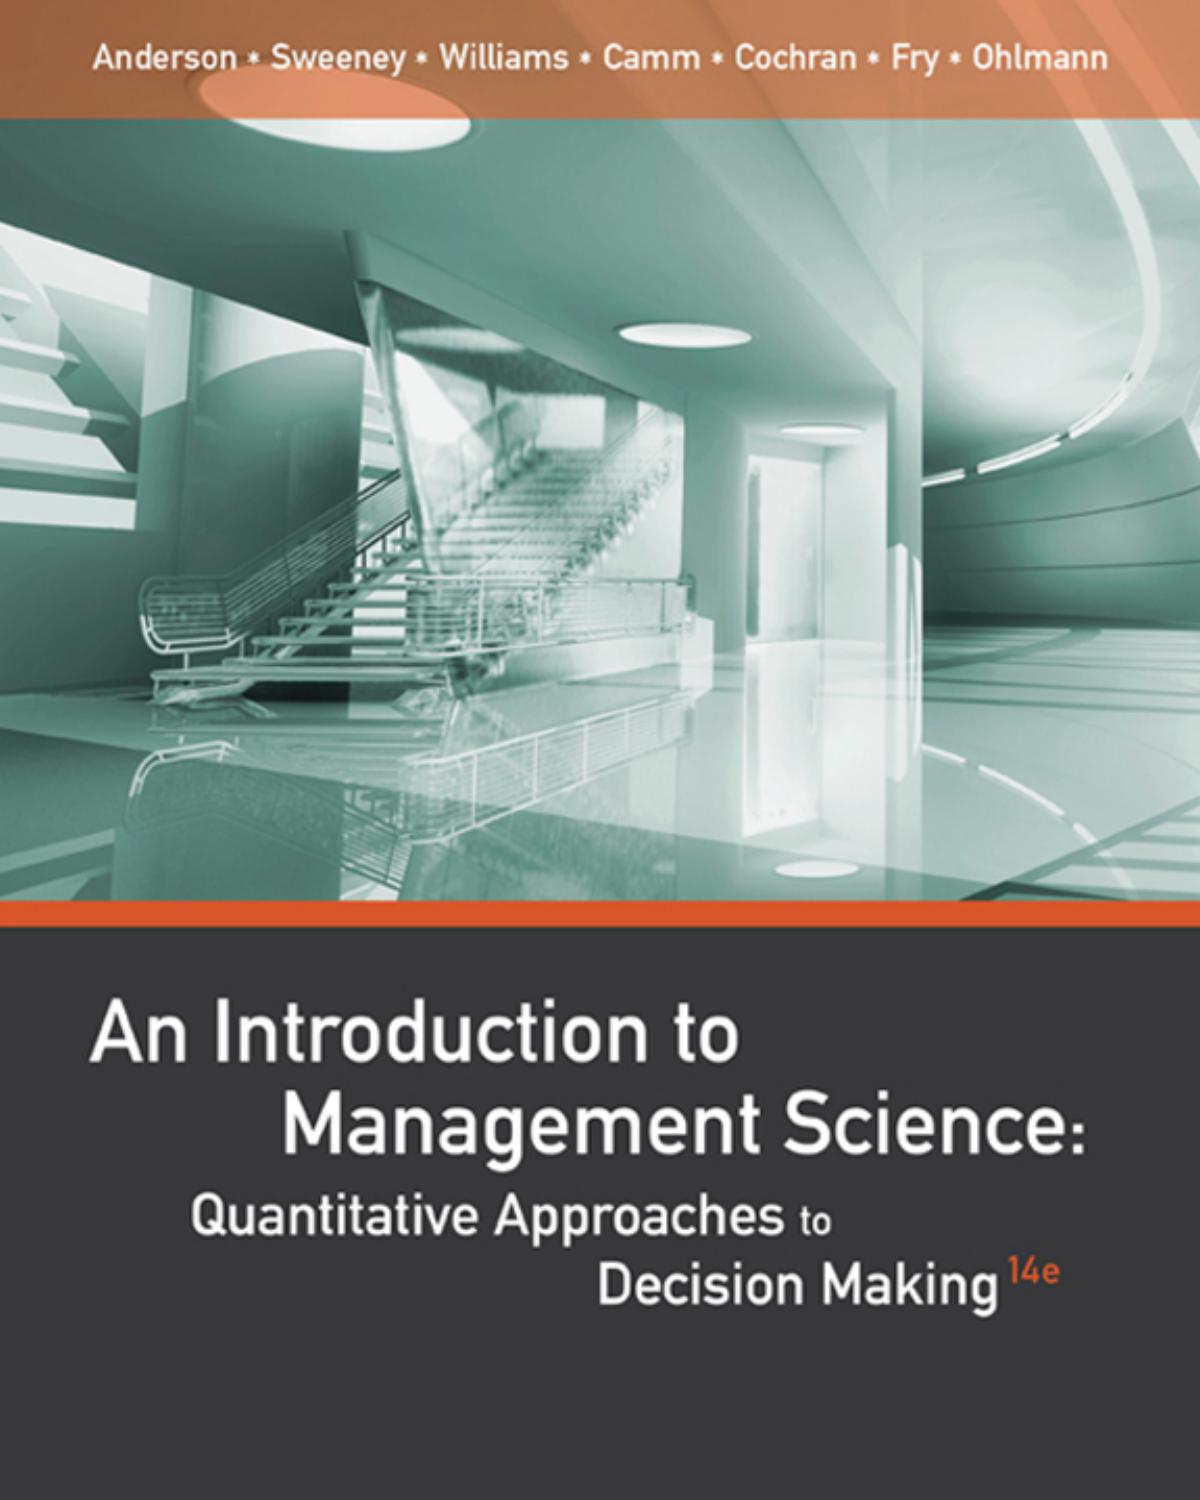 Introduction to Management Science Quantitative Approaches 14th Edition by tois J. Sweeney, An.jpg